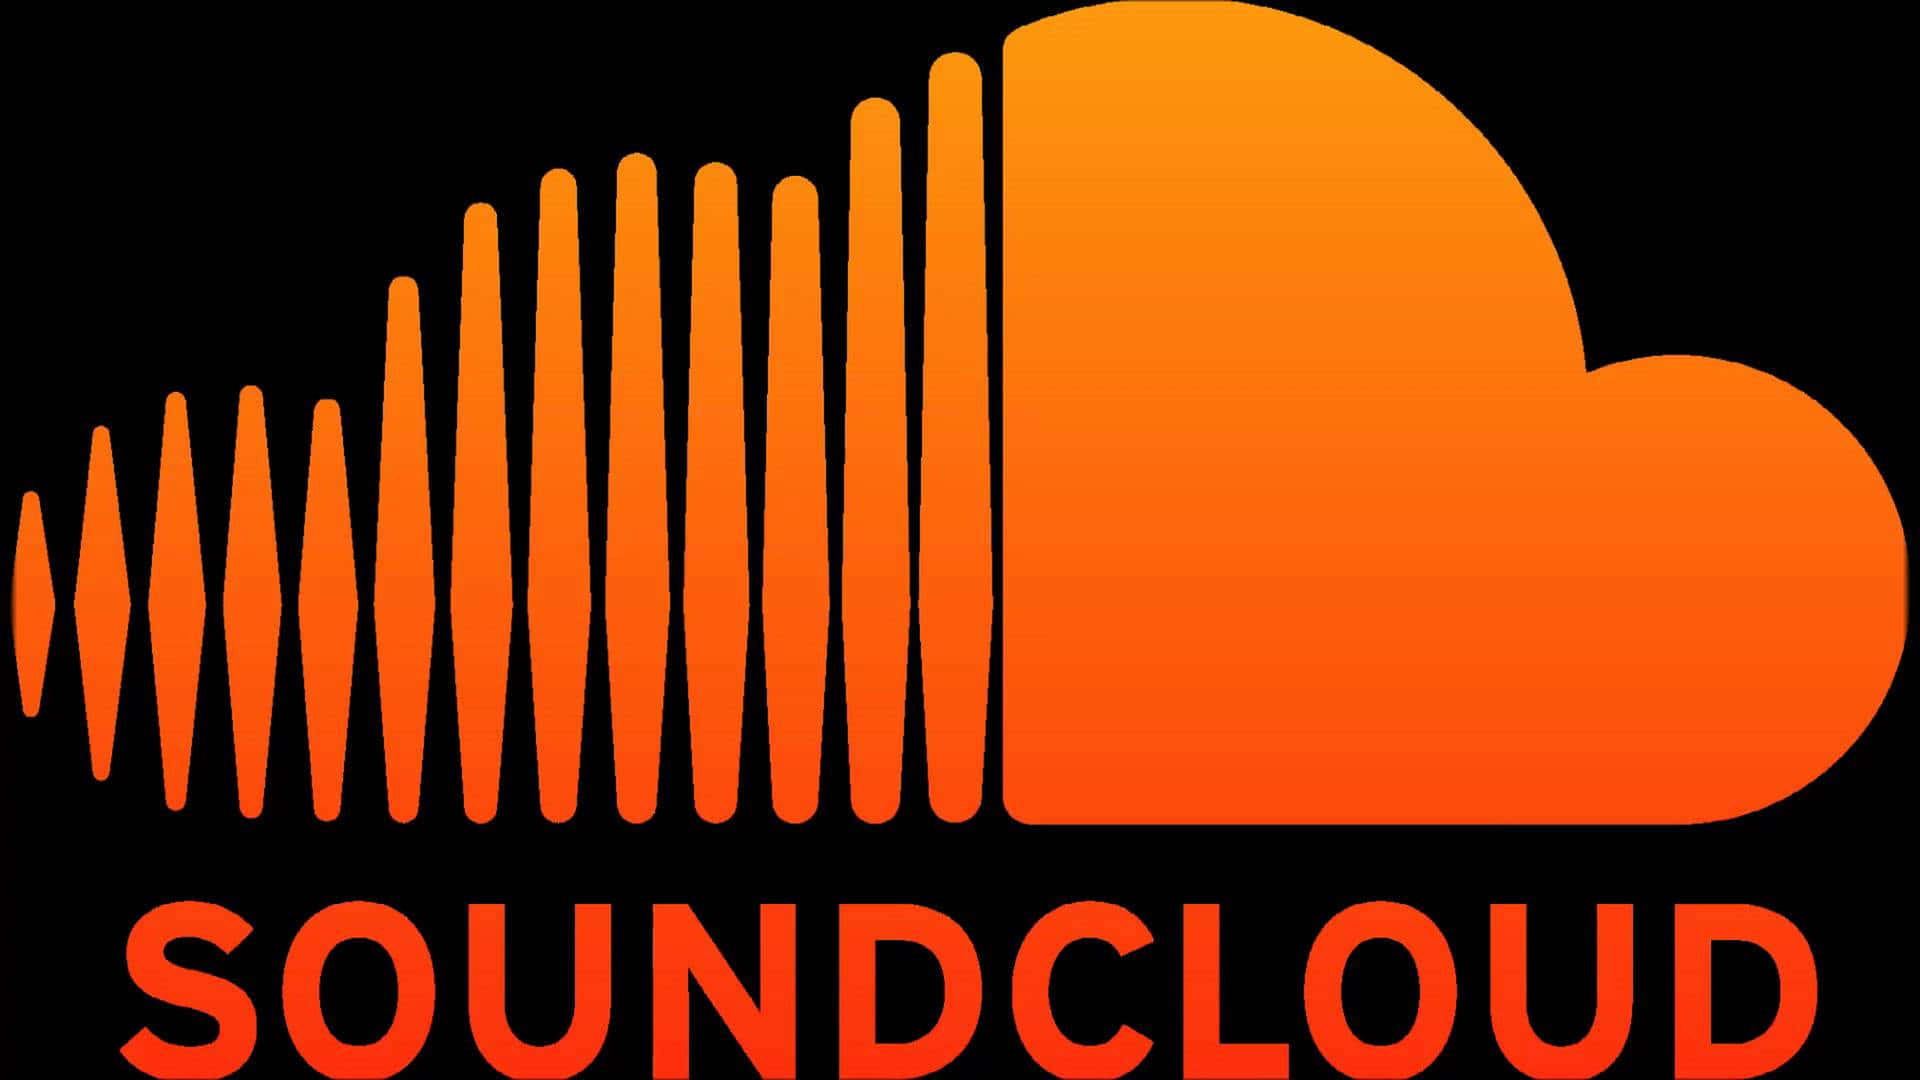 Unlock new and awesome music through Soundcloud